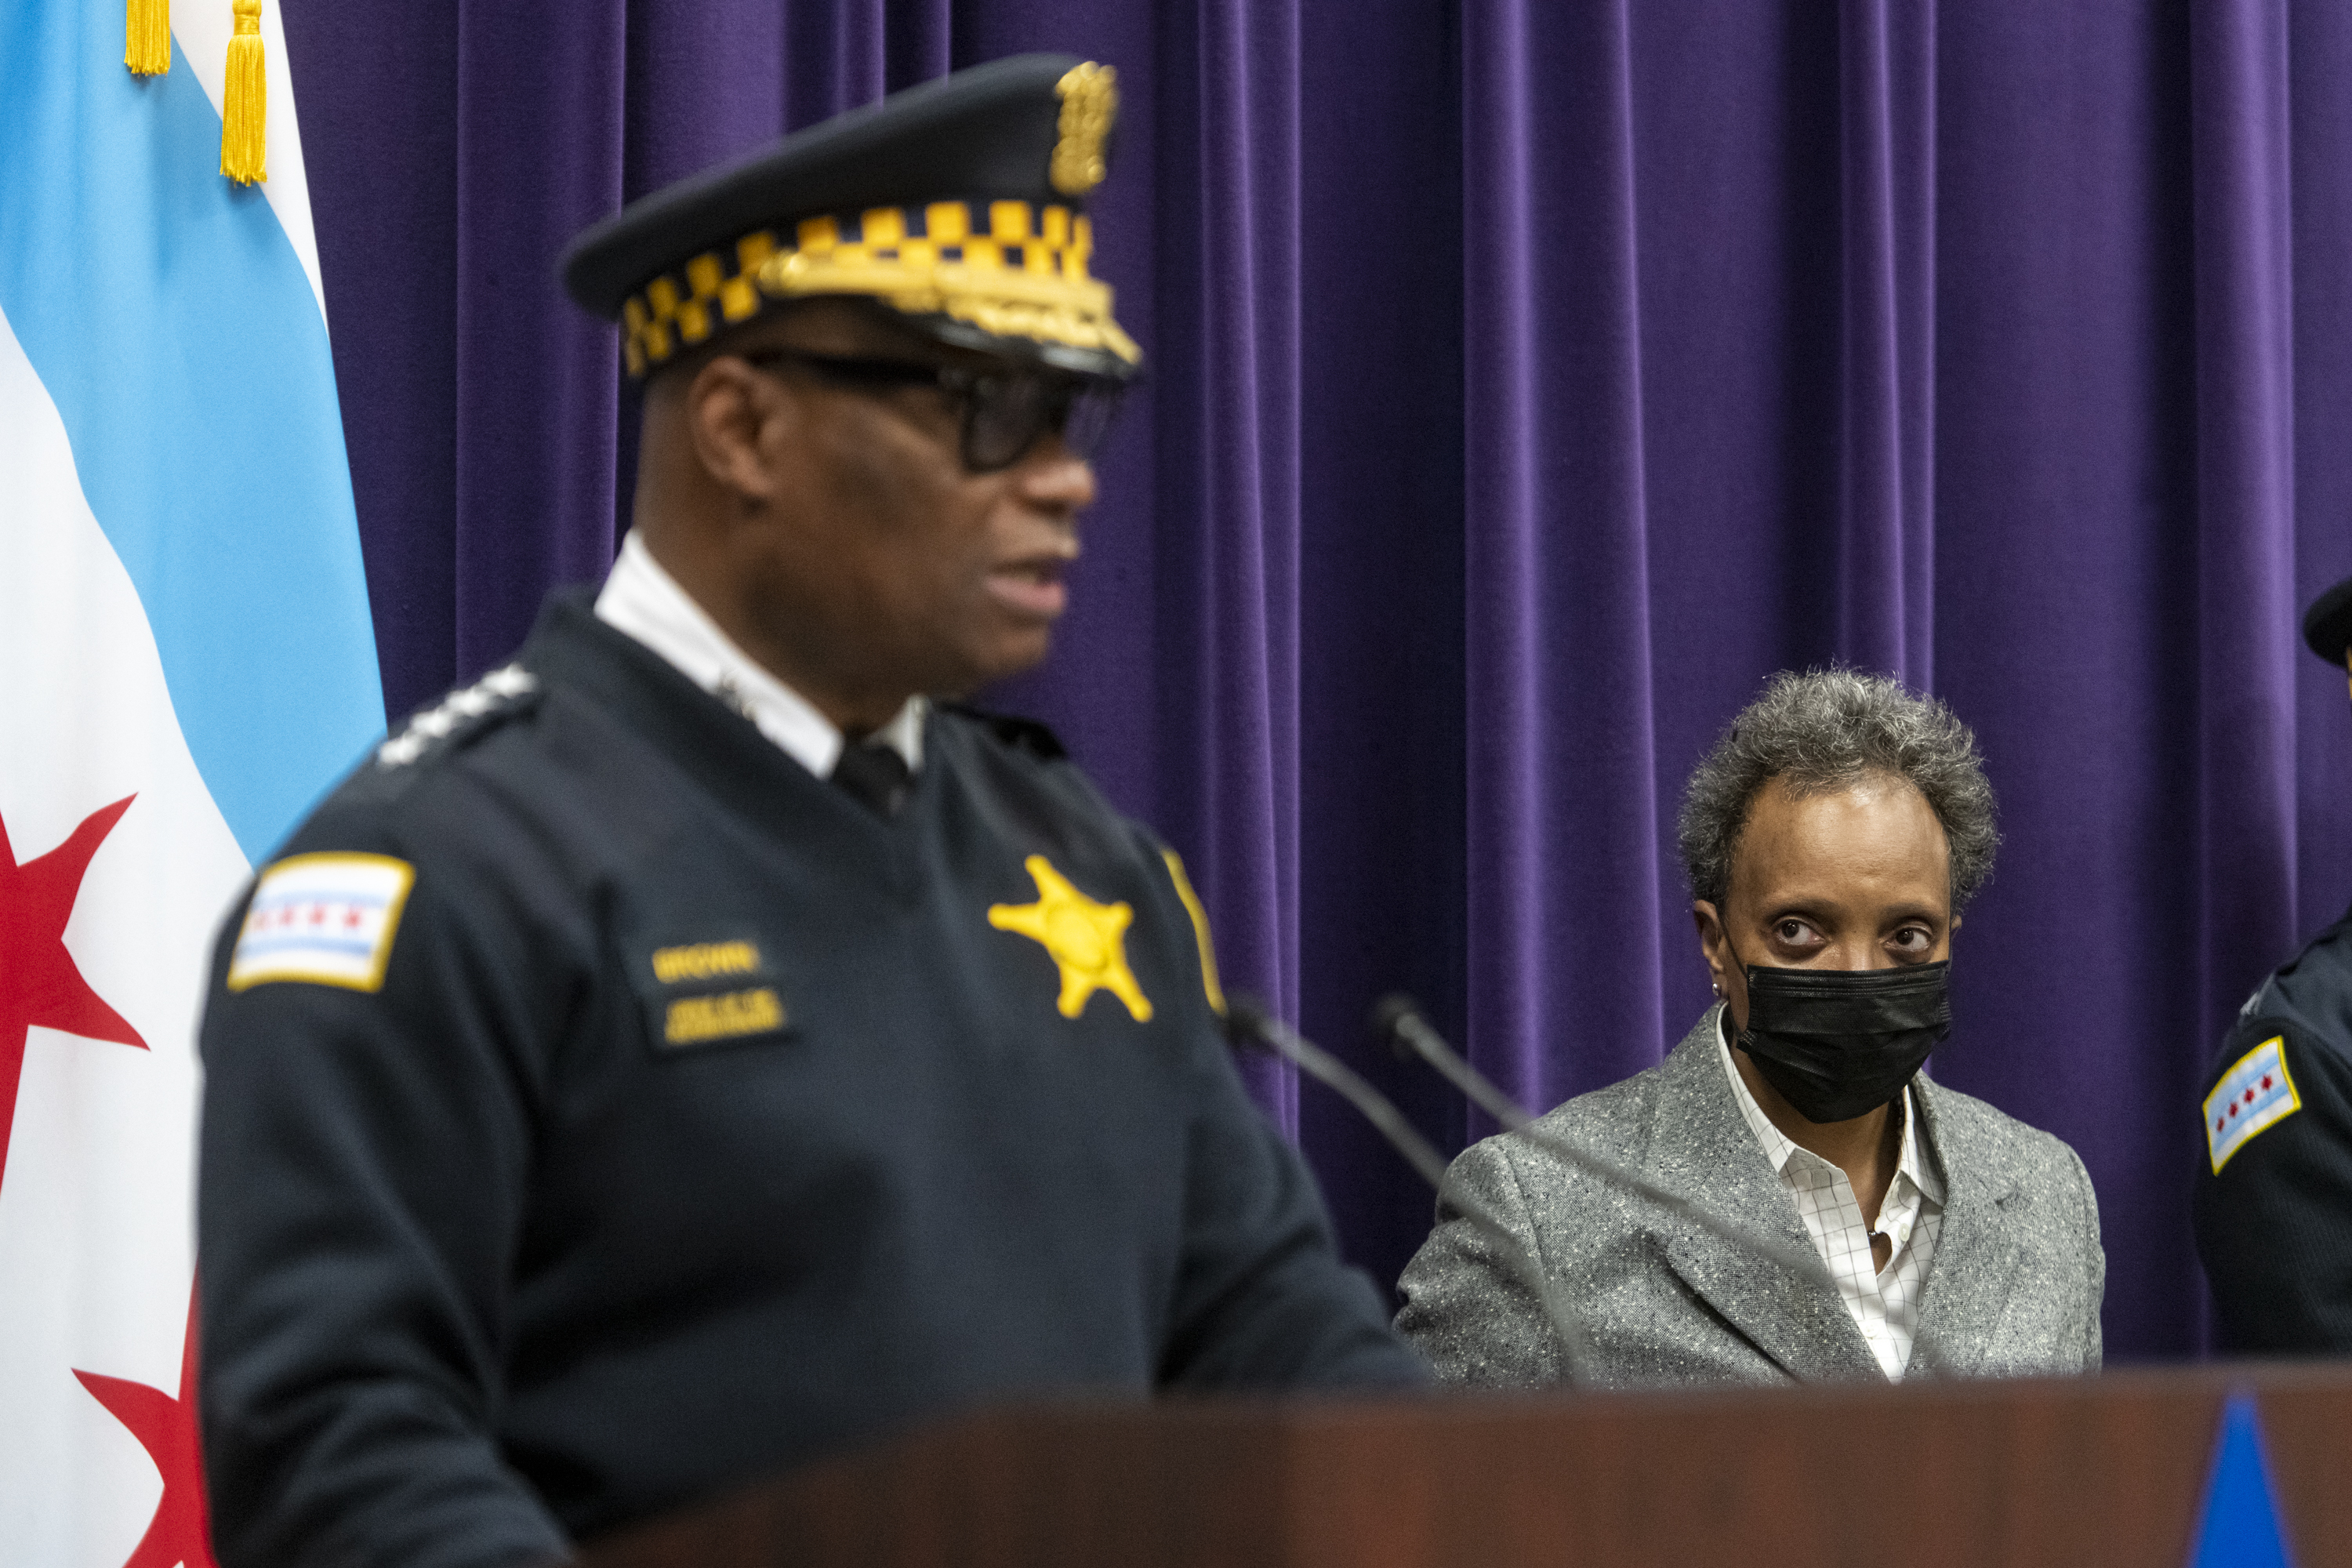 Mayor Lori Lightfoot, right, listens as Chicago Police Supt. David Brown speaks to reporters at a press conference at Chicago Police Headquarters on Jan. 4, 2022.